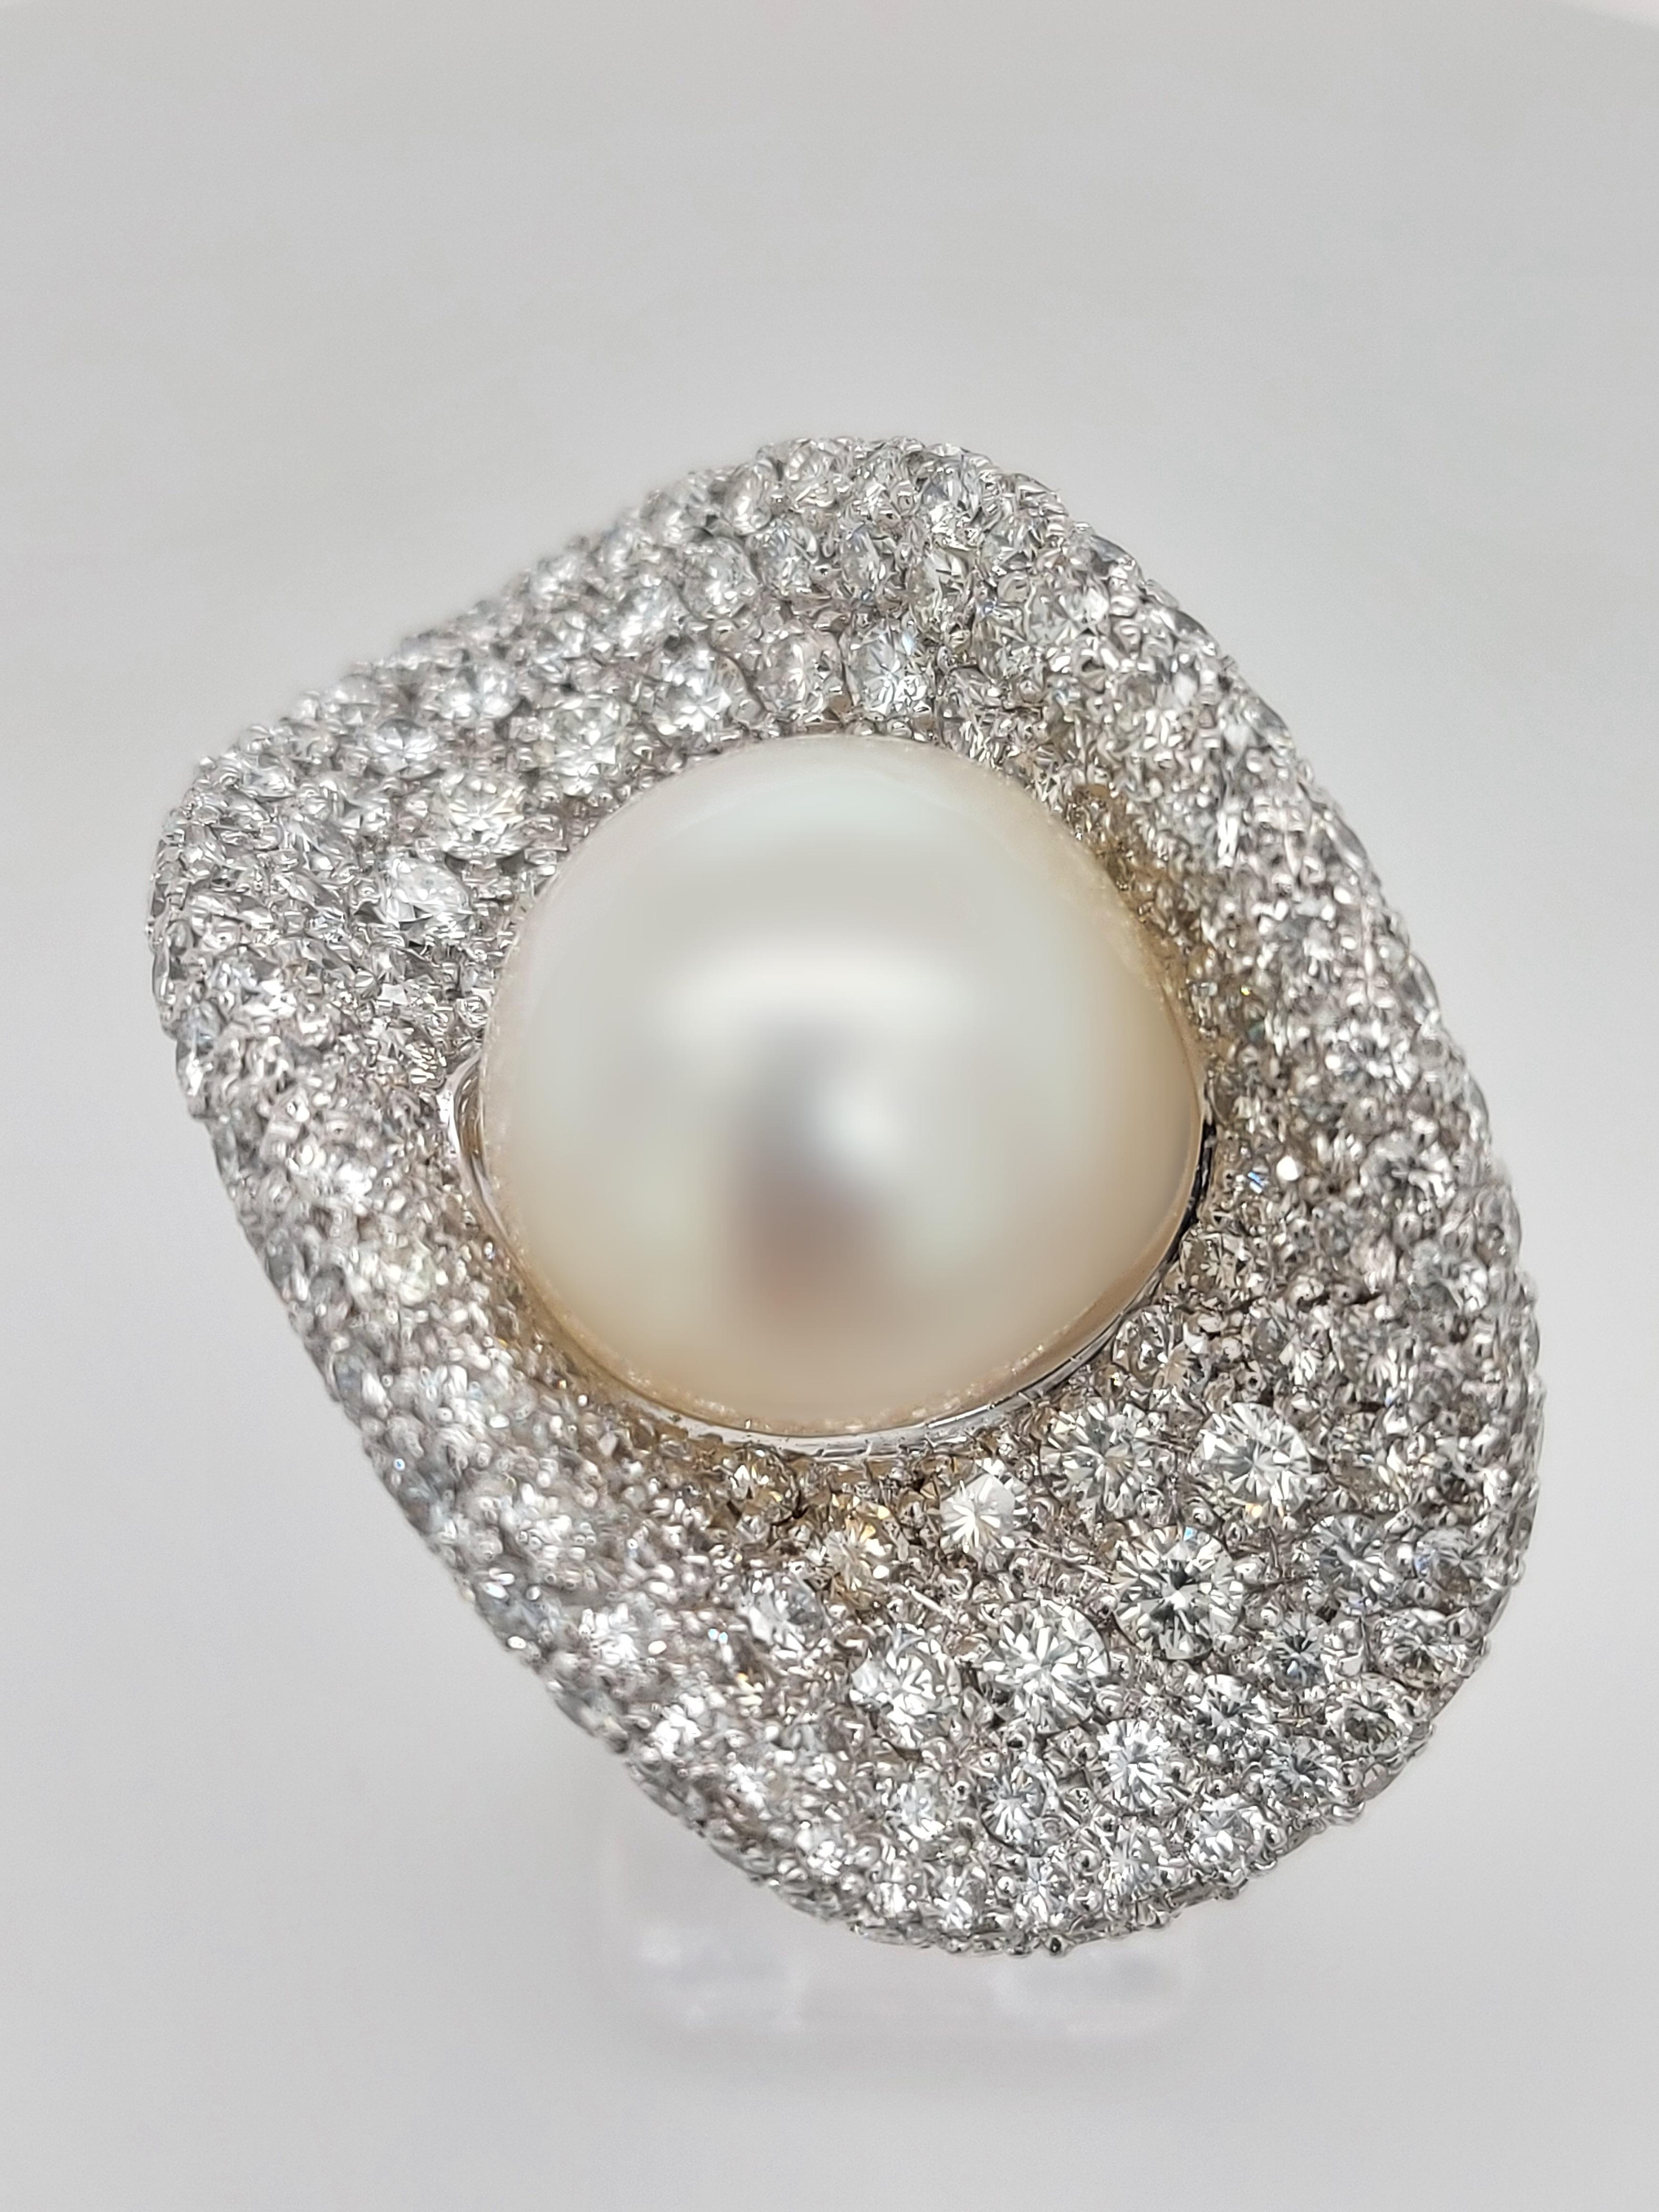 Magnificent 18 Karat White Gold Ring with 14.5 Carat Diamonds and a Big Pearl For Sale 4